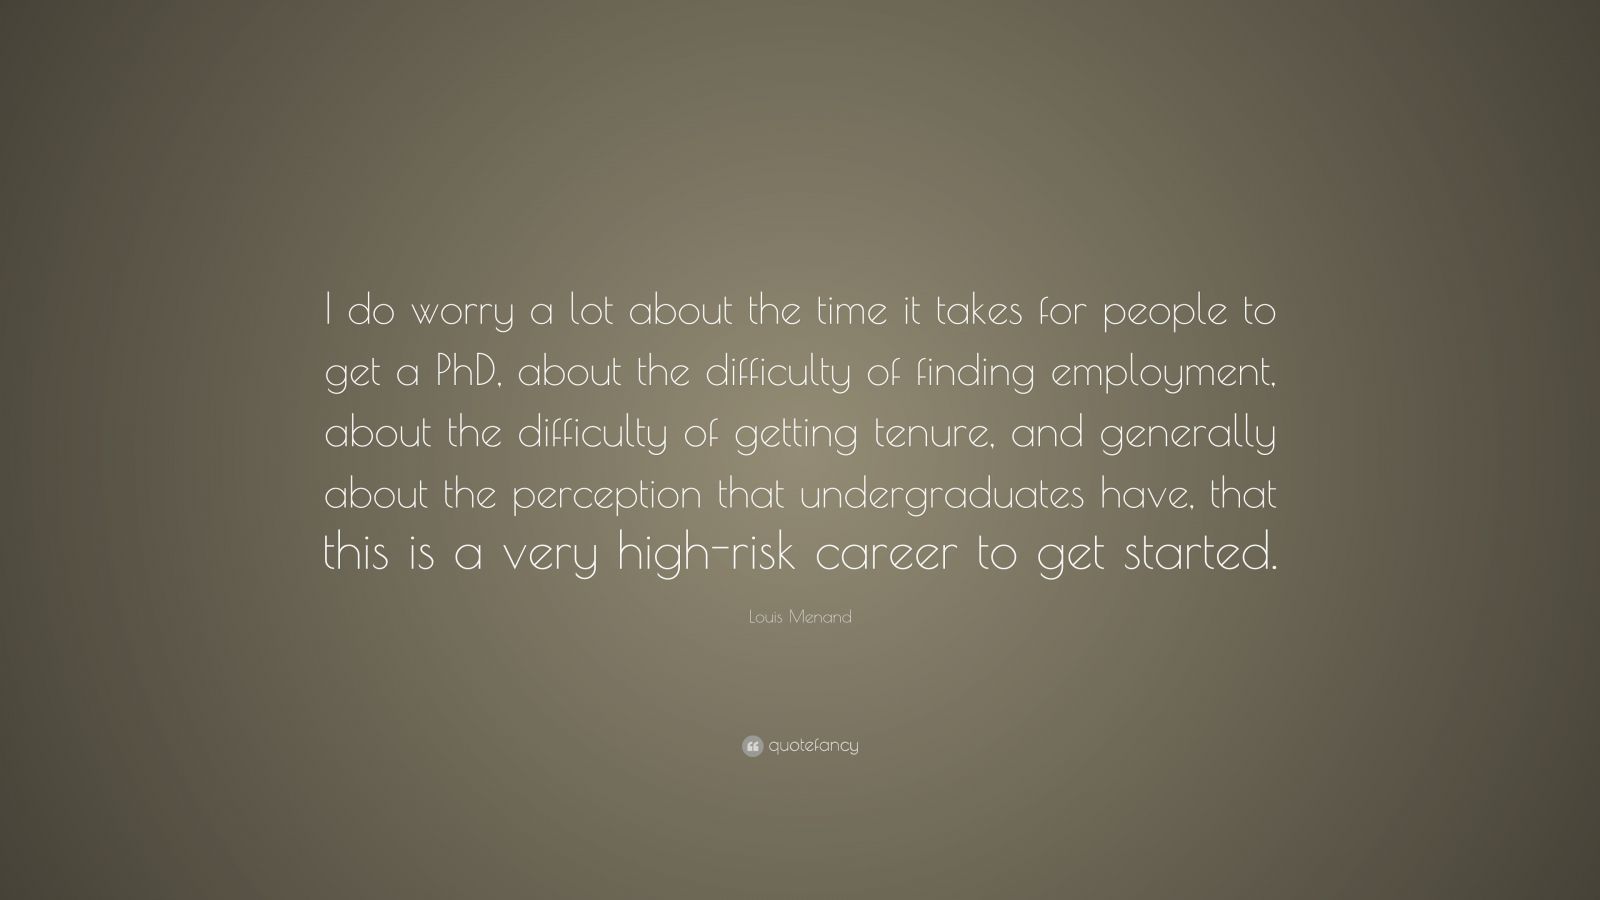 Louis Menand Quote: “I do worry a lot about the time it takes for people to get a PhD, about the ...